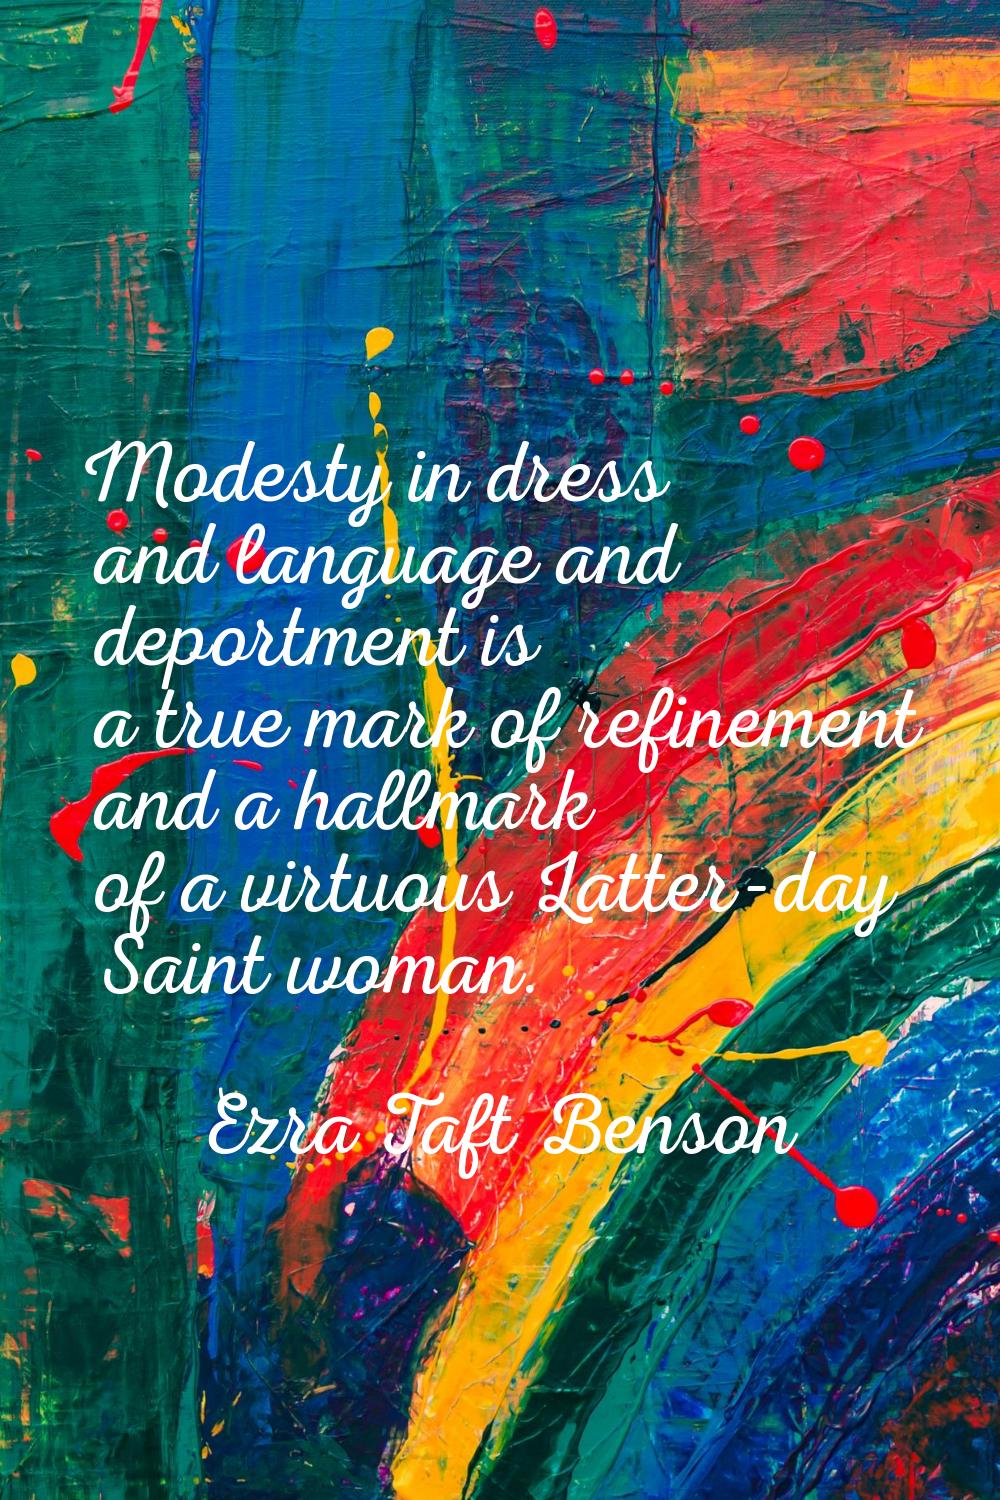 Modesty in dress and language and deportment is a true mark of refinement and a hallmark of a virtu